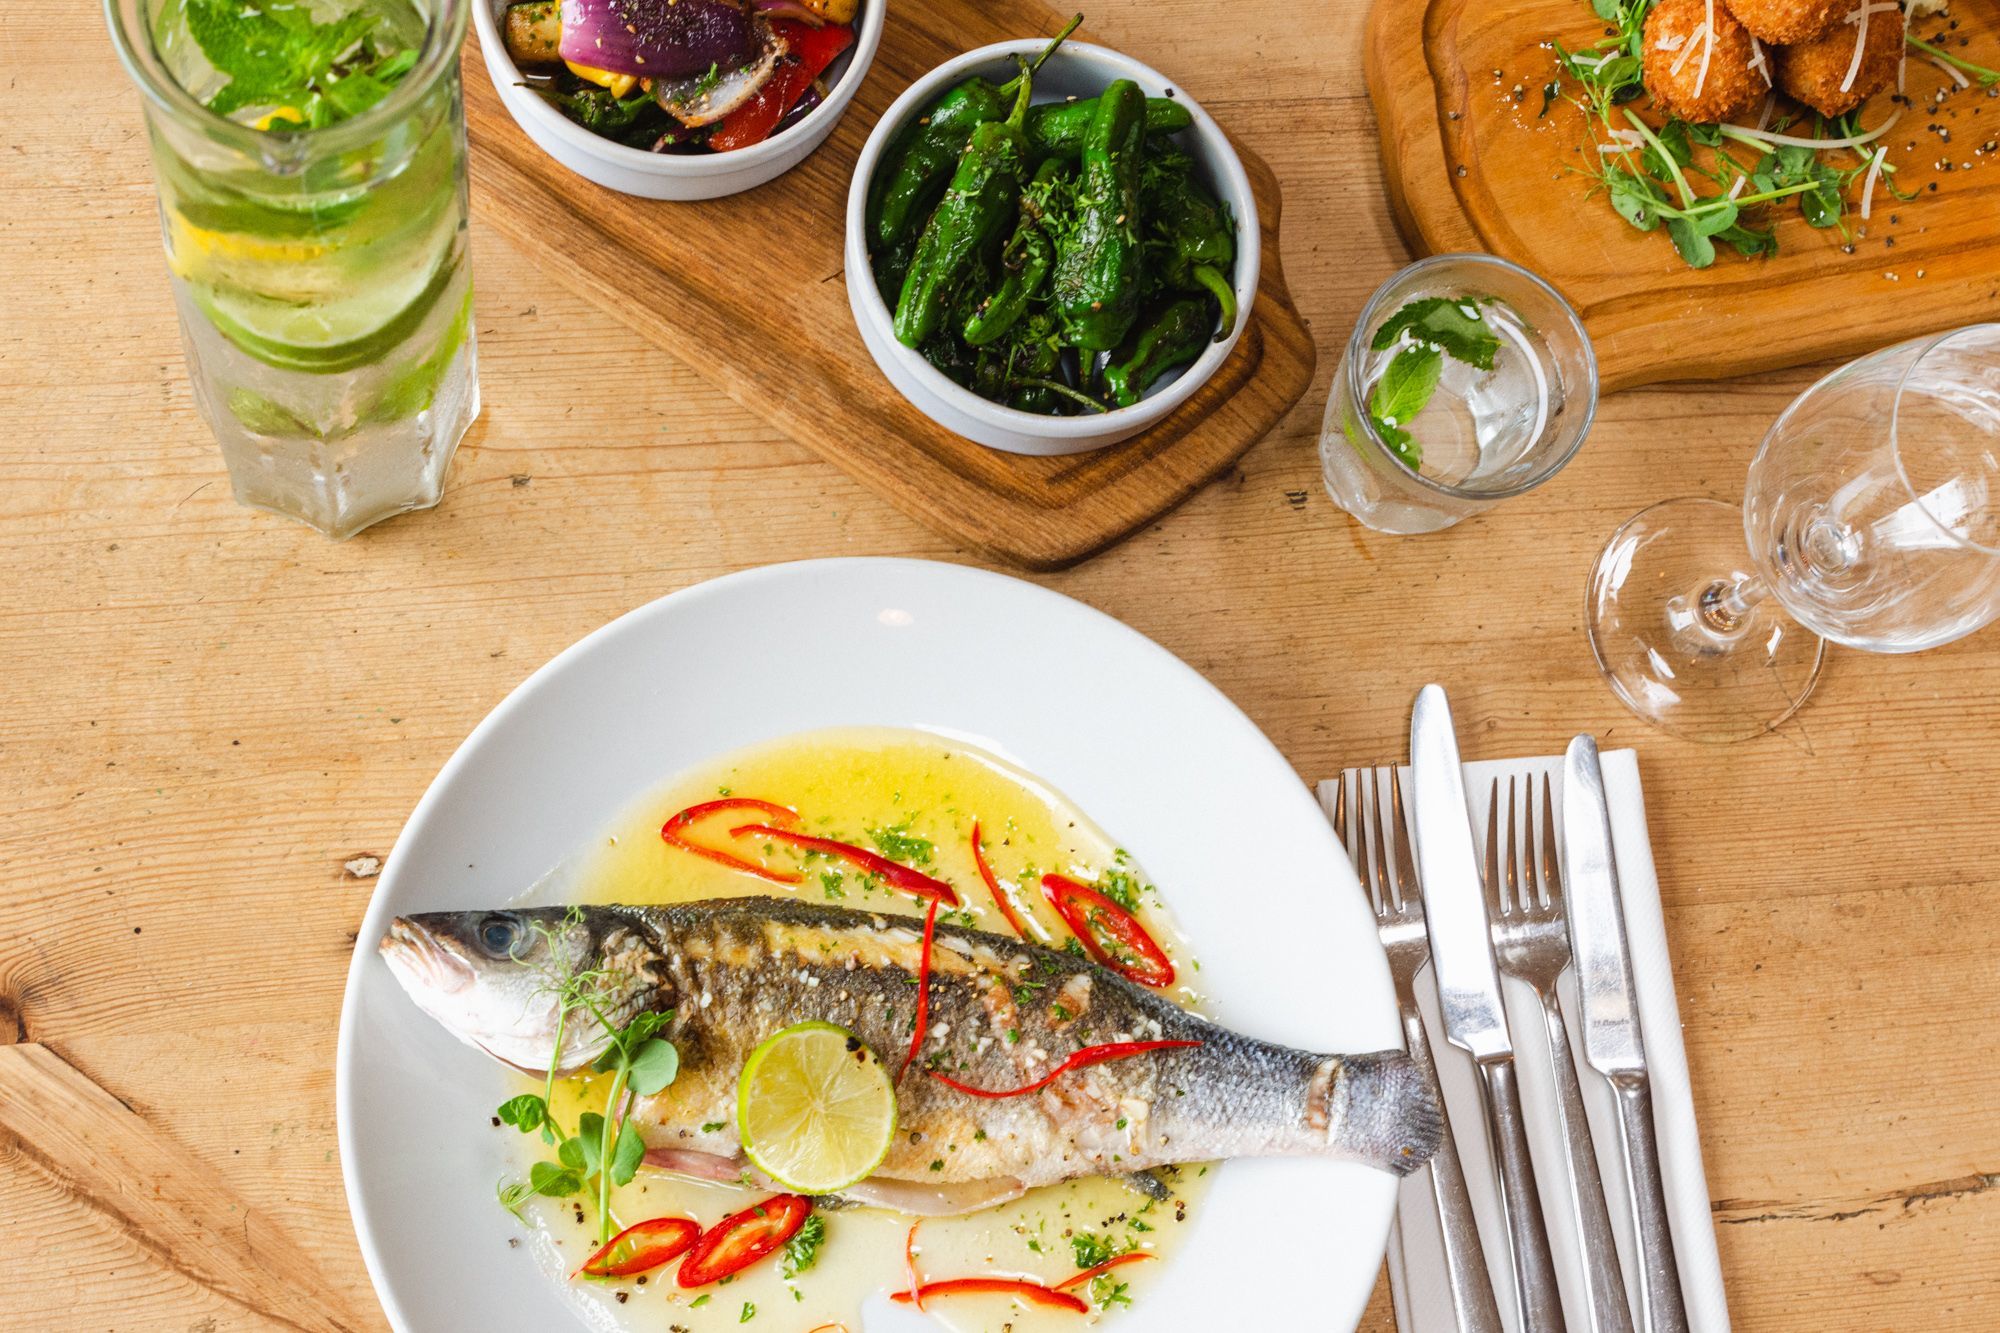 The Mediterranean-inspired menu at Amélie majors on locally-caught fish and seafood Picture: Tom Meldrum